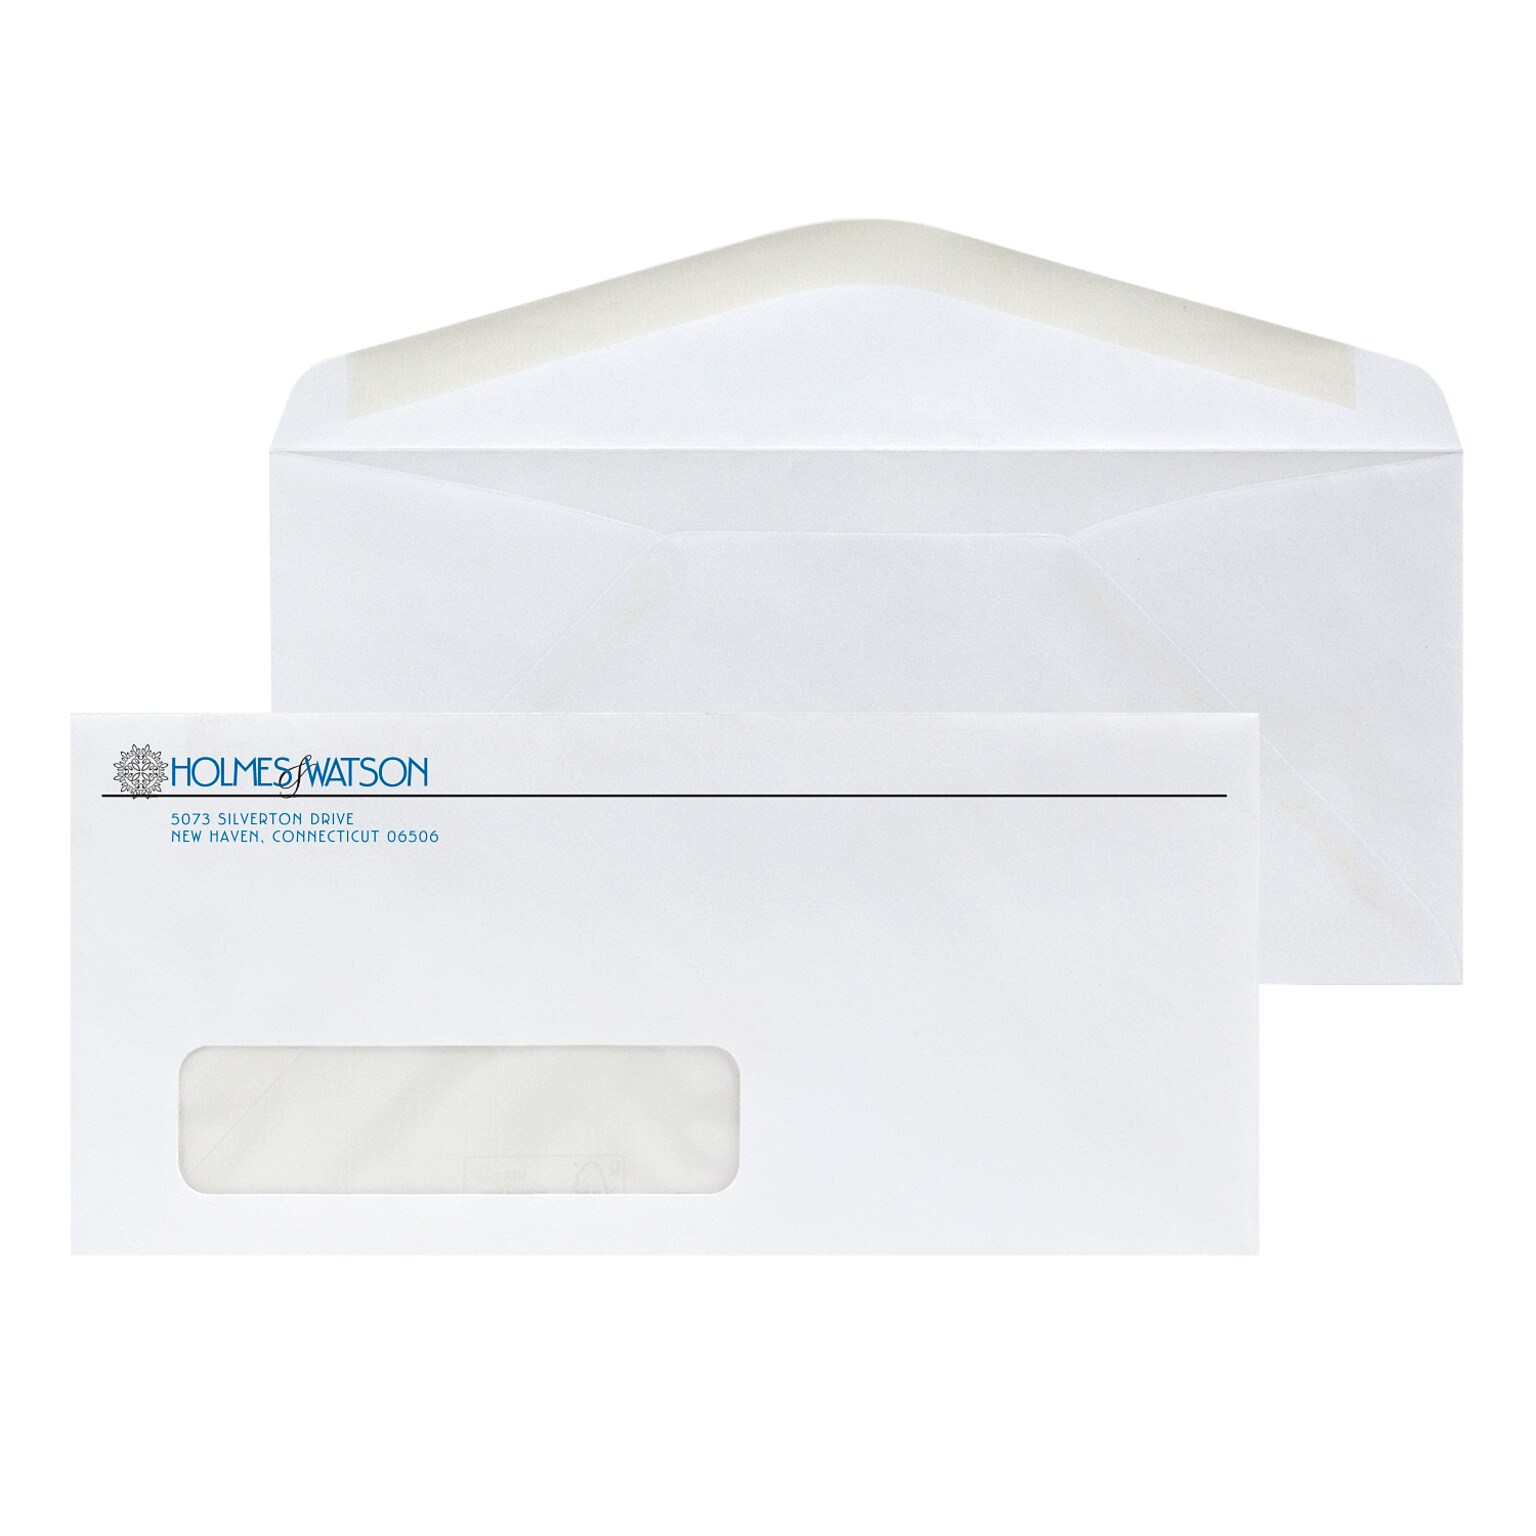 Custom #10 Window Envelopes, 4 1/4 x 9 1/2, Recycled 24# White Wove with EarthFirst/SFI Logo, 2 Standard Inks, 250 / Pack